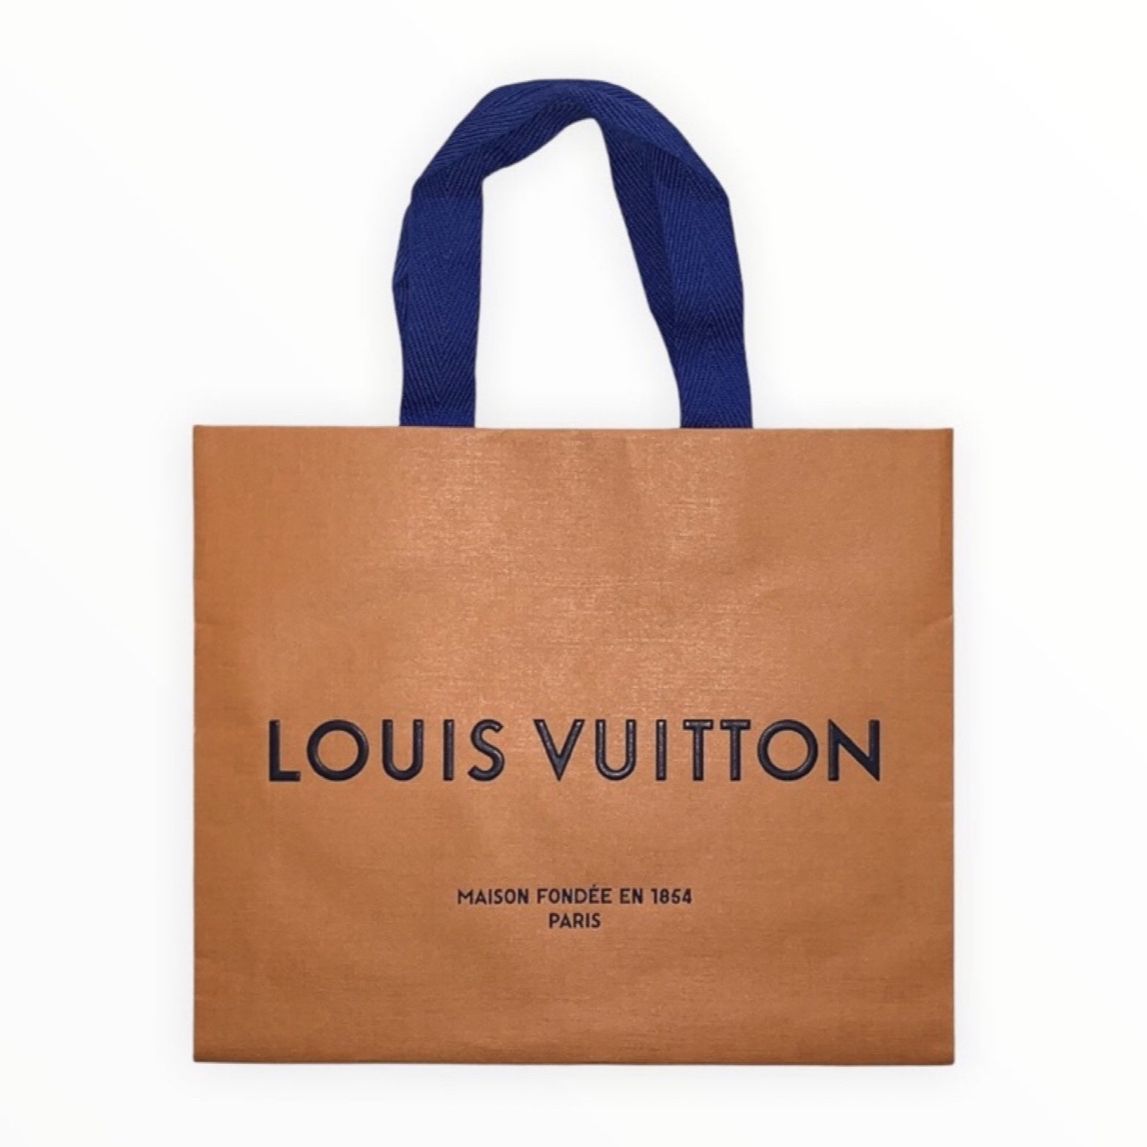 Authentic Louis Vuitton Paper Shopping Gift Bag for Sale in